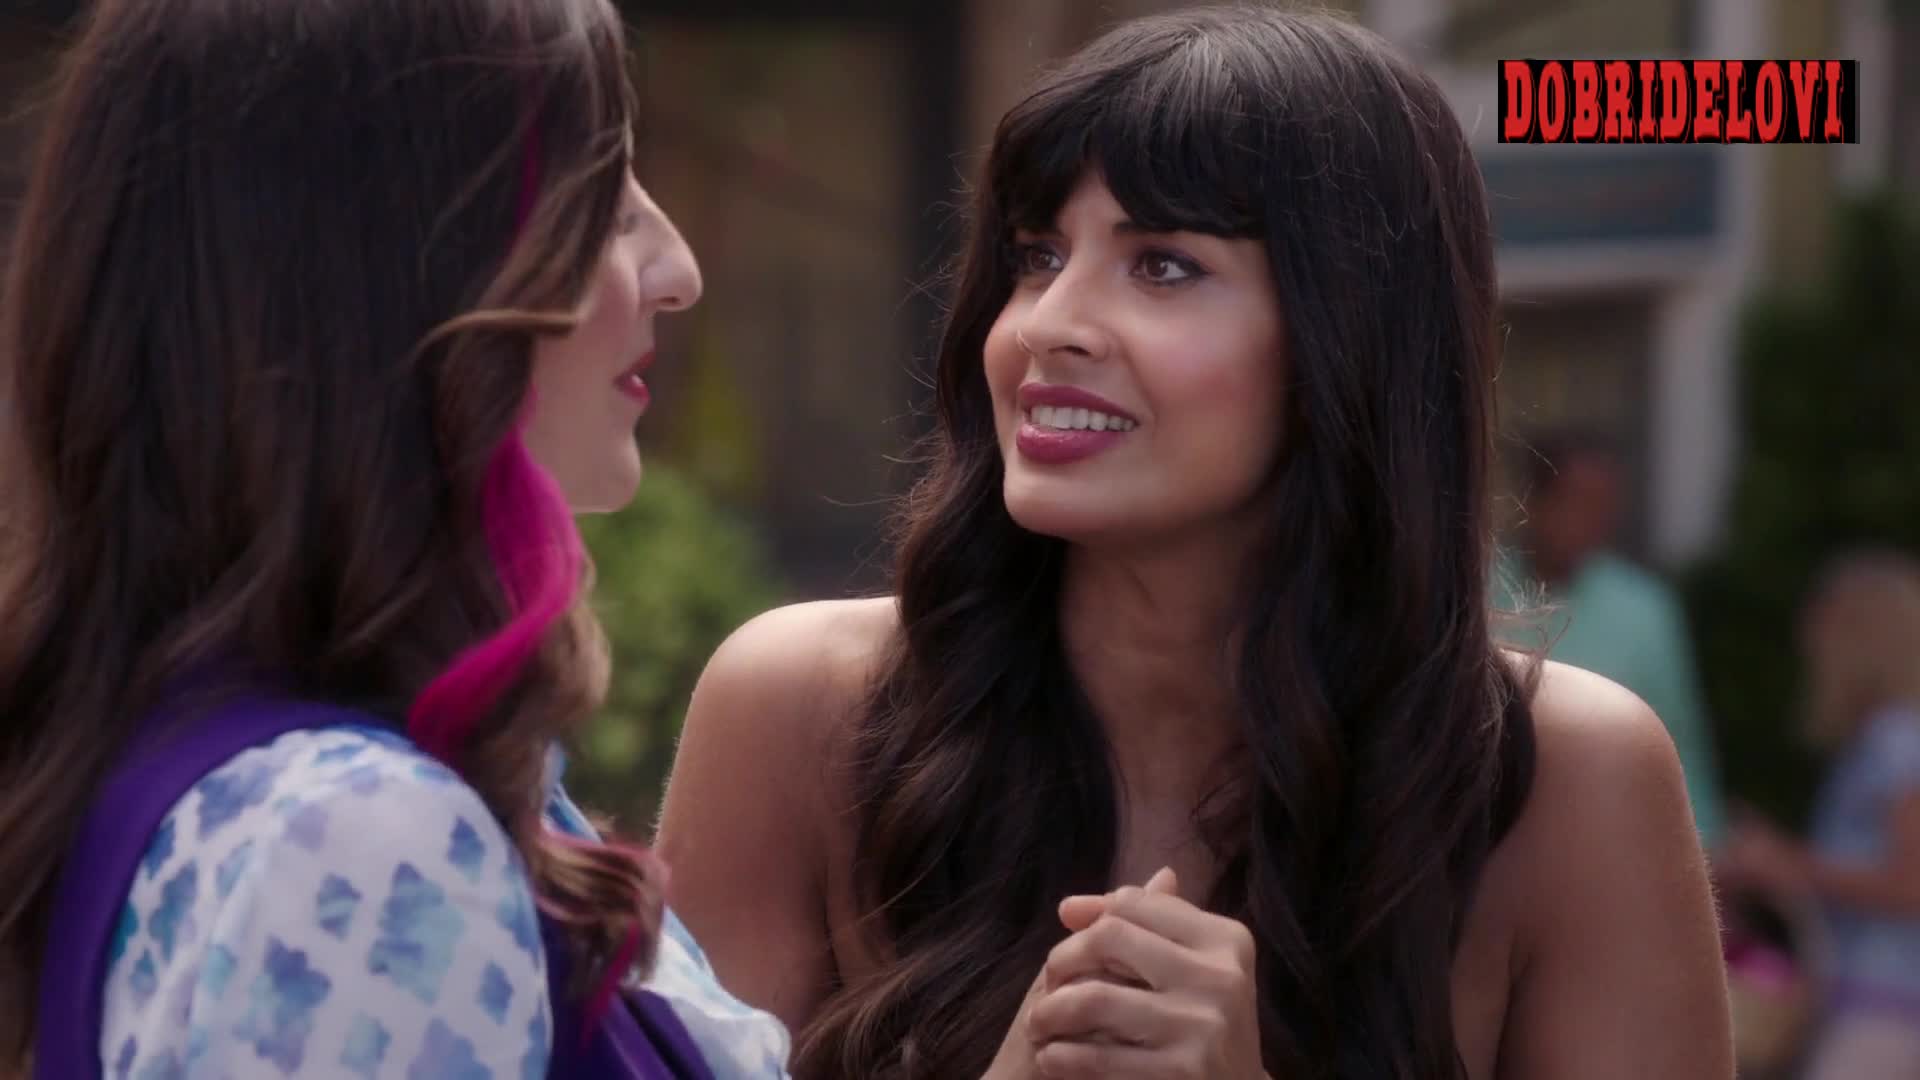 Jameela Jamil sexy dress scene in the Good Place